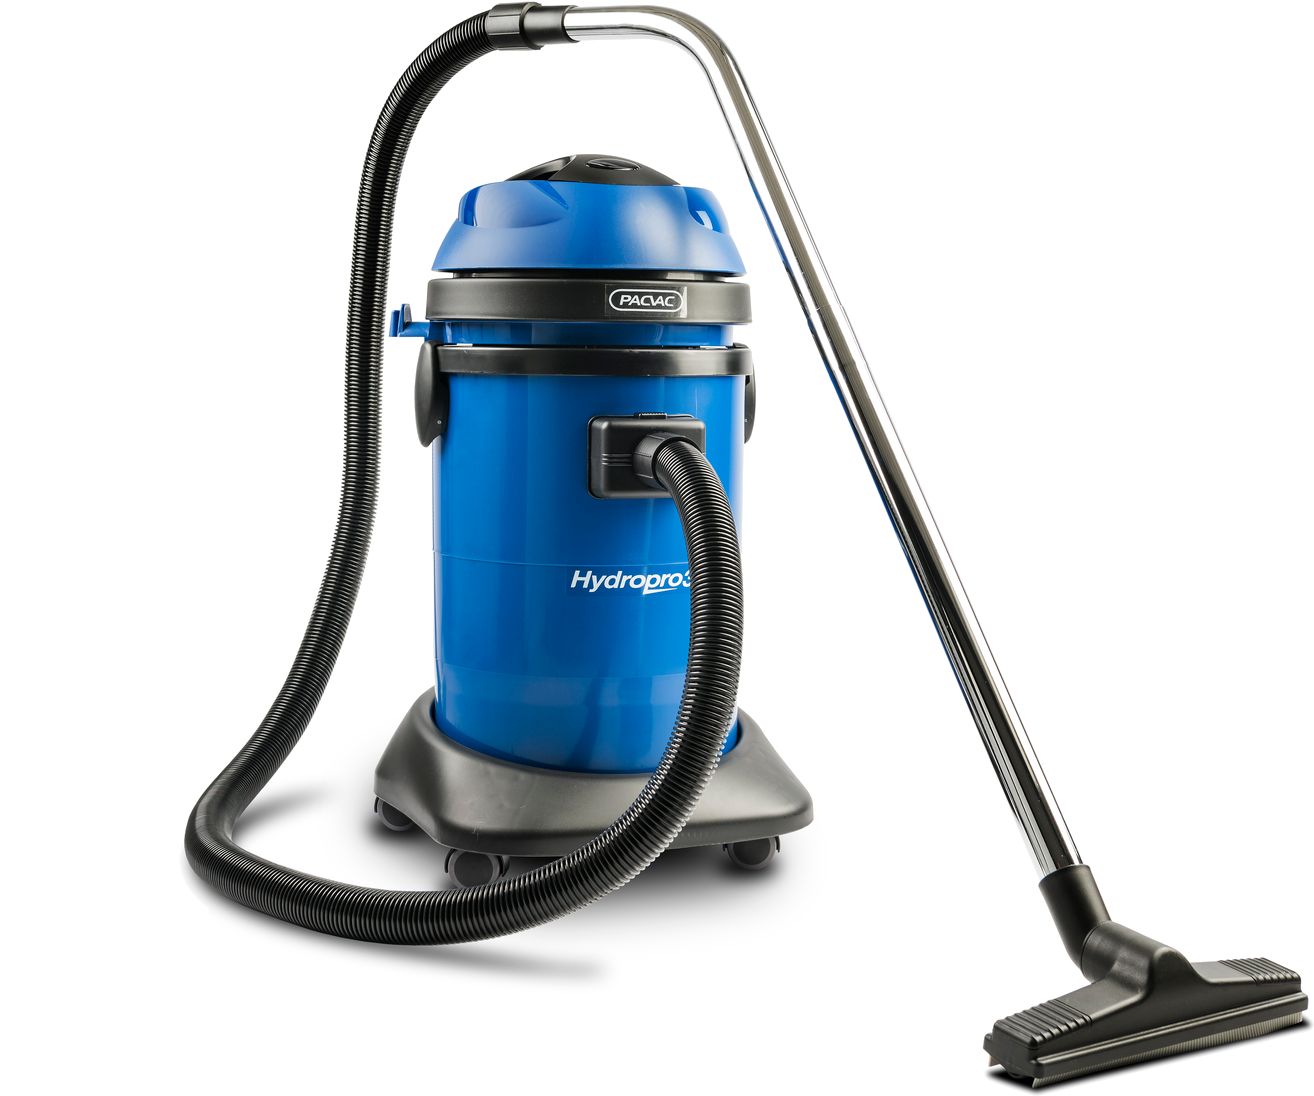 Coffs Cleaner World Vacuum Cleaner Sales And Repairs - Coffs Cleaner World (1367x1196)